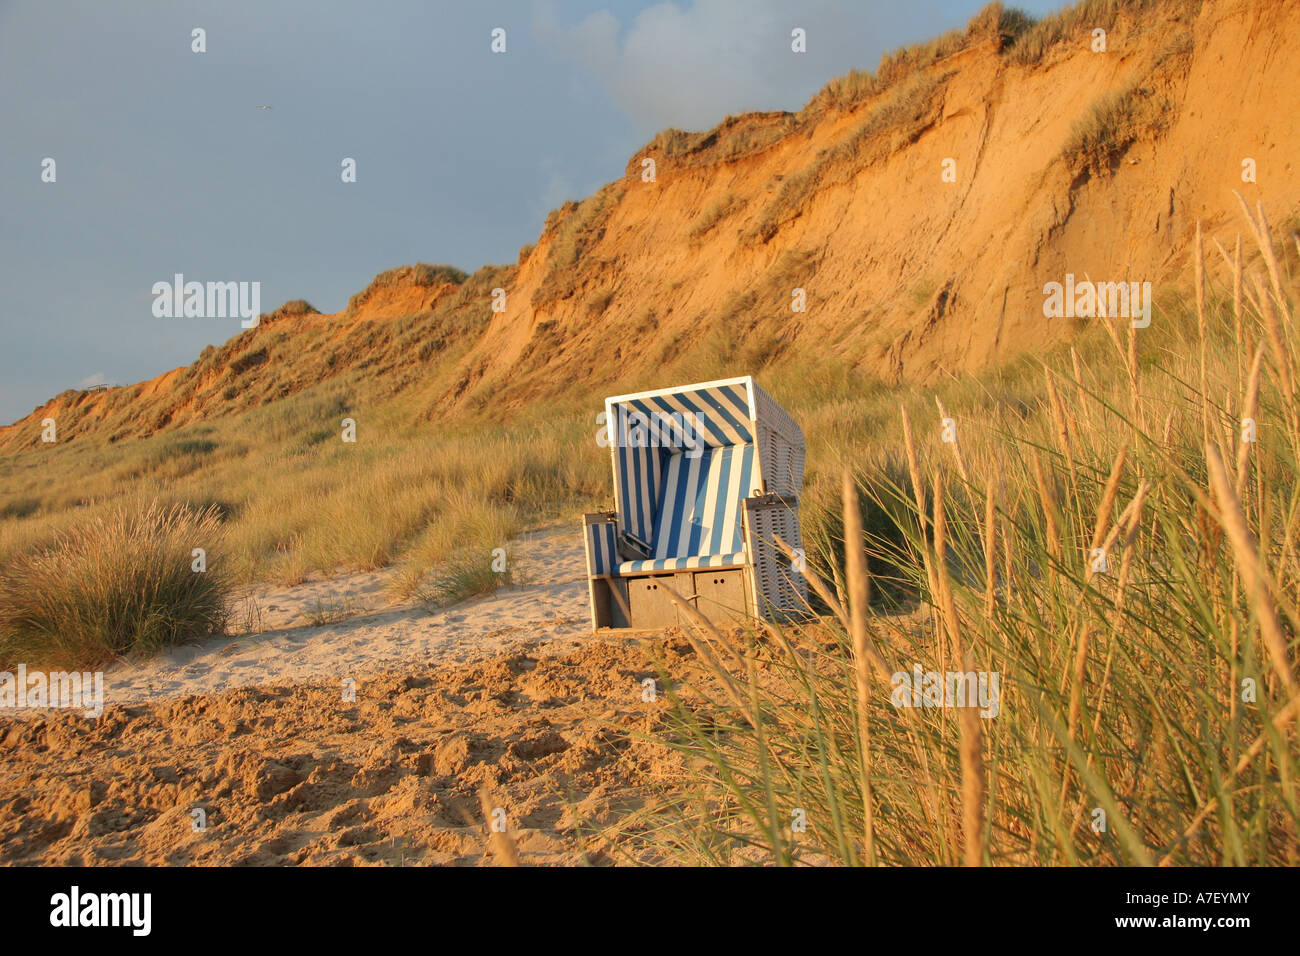 Beach chair in front of the red cliff, Kampen, Wenningstedt, Sylt, Schleswig-Holstein, Germany Stock Photo